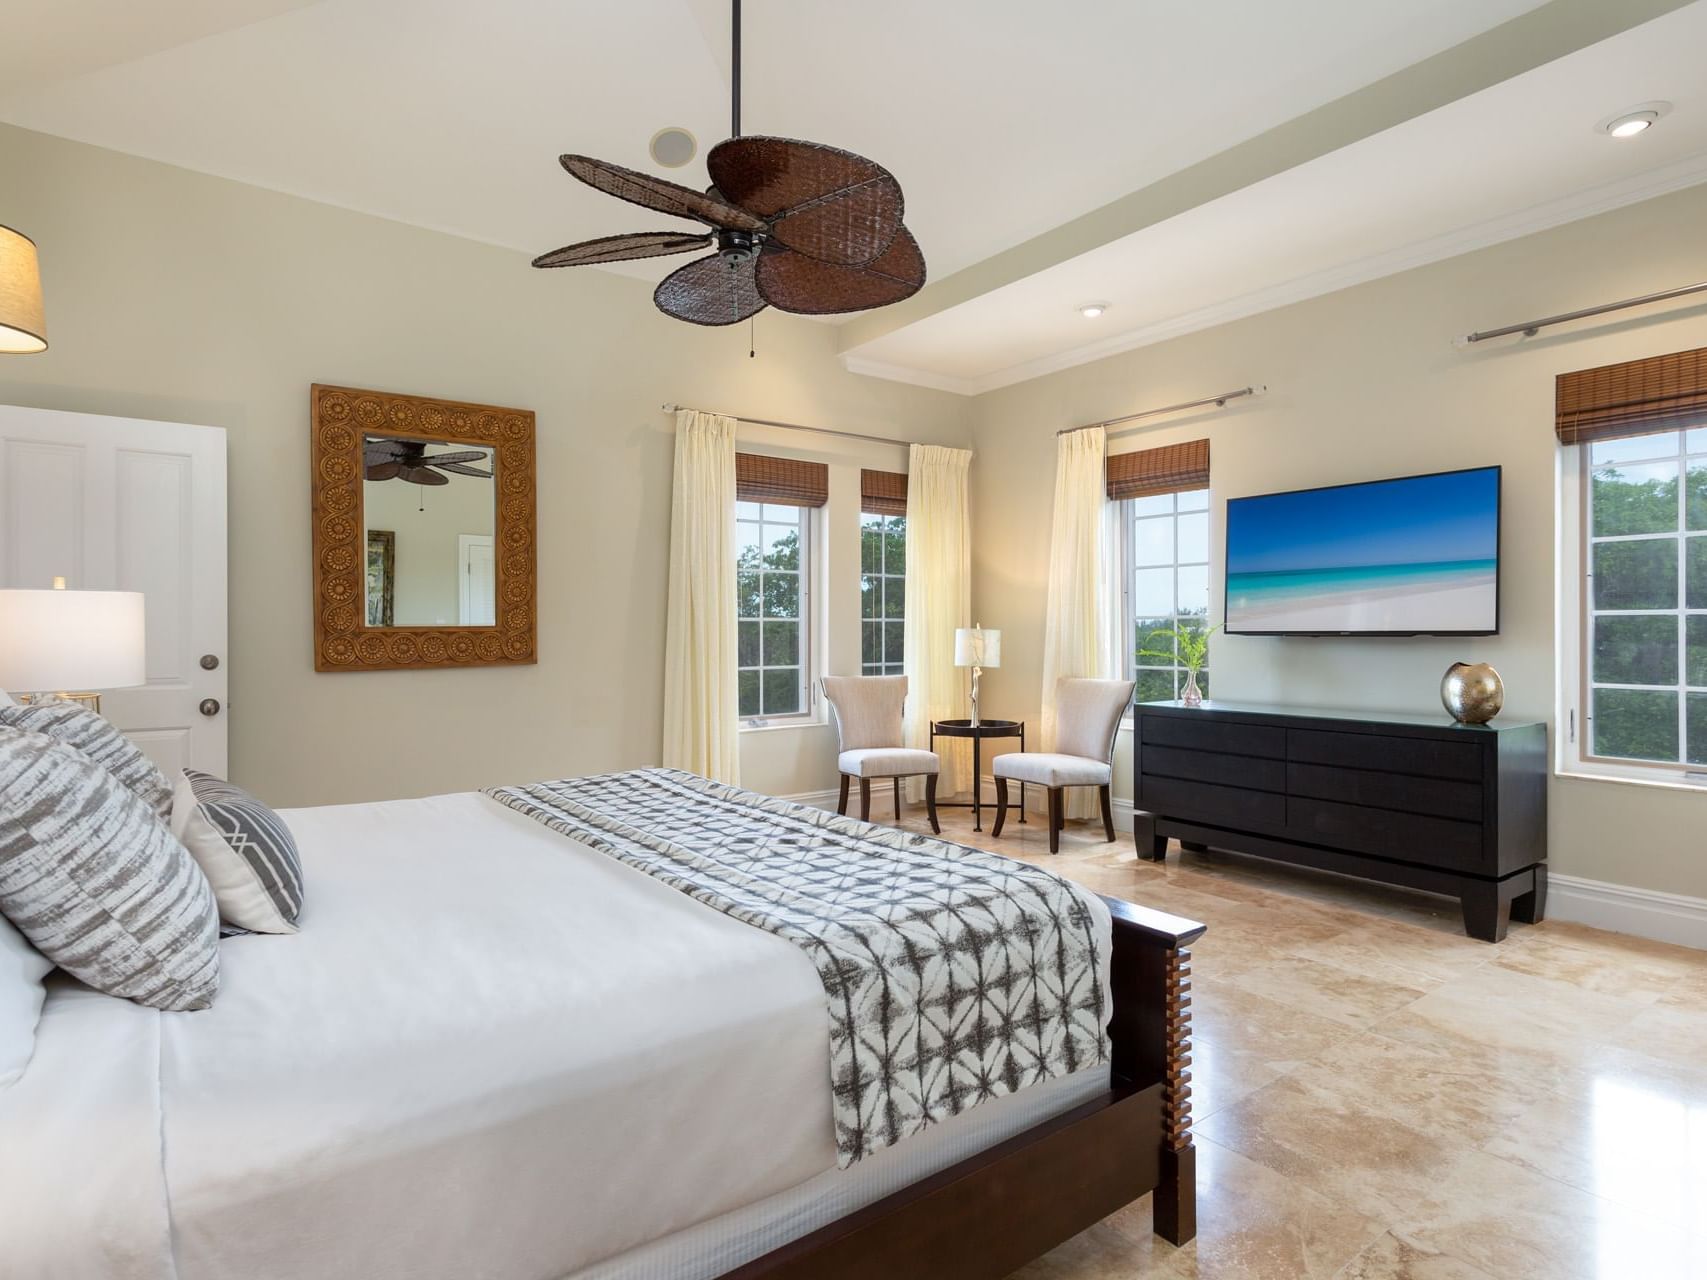 King bed in One Bedroom at Somerset On Grace Bay
